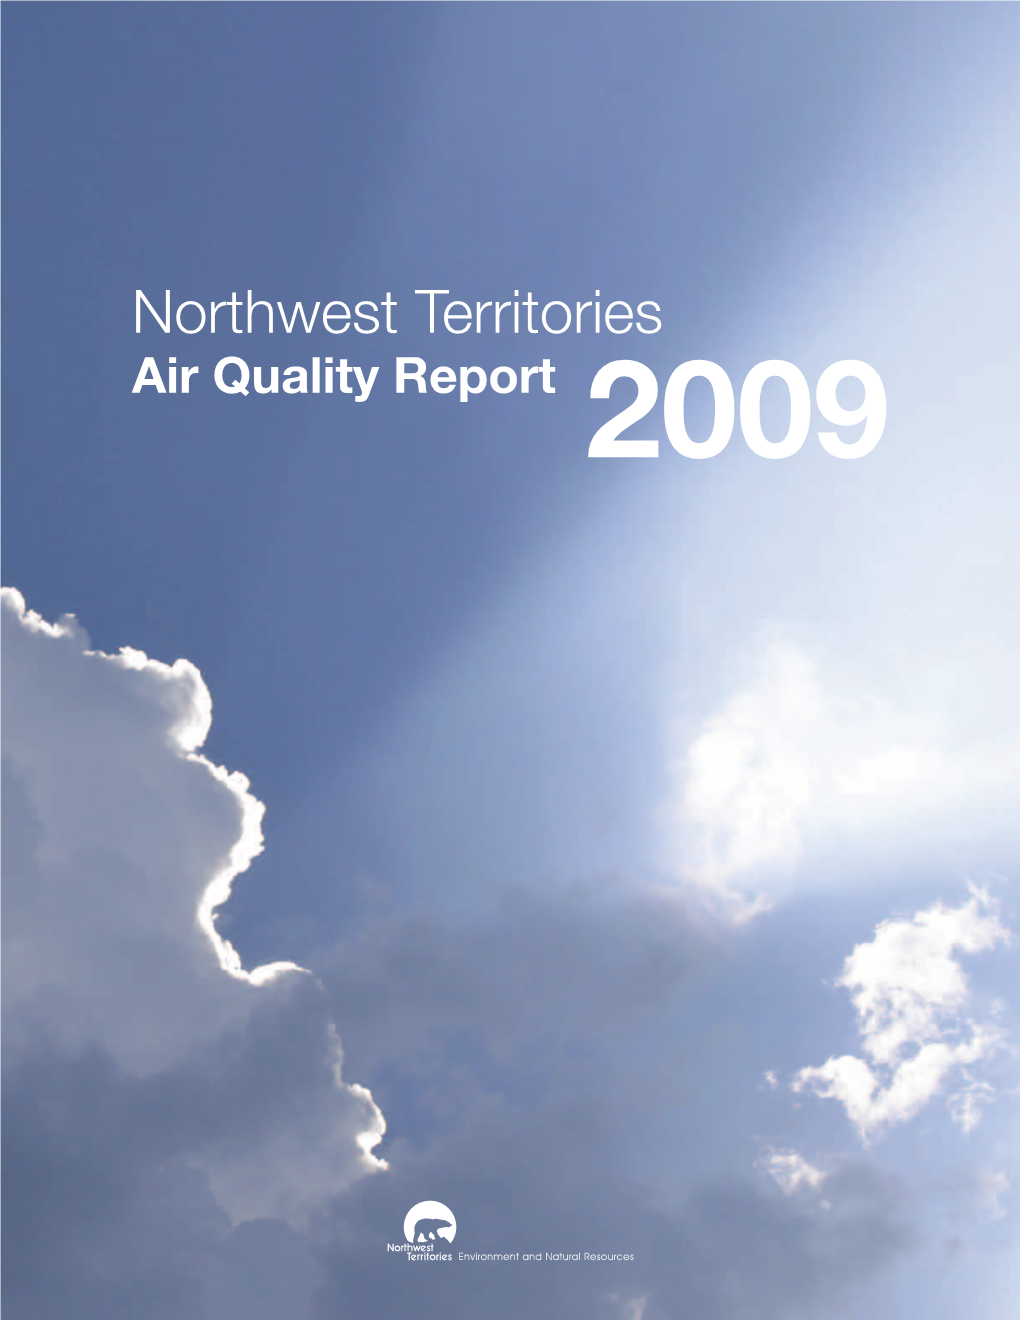 NWT Air Quality Report 2009 1 Snare Rapids